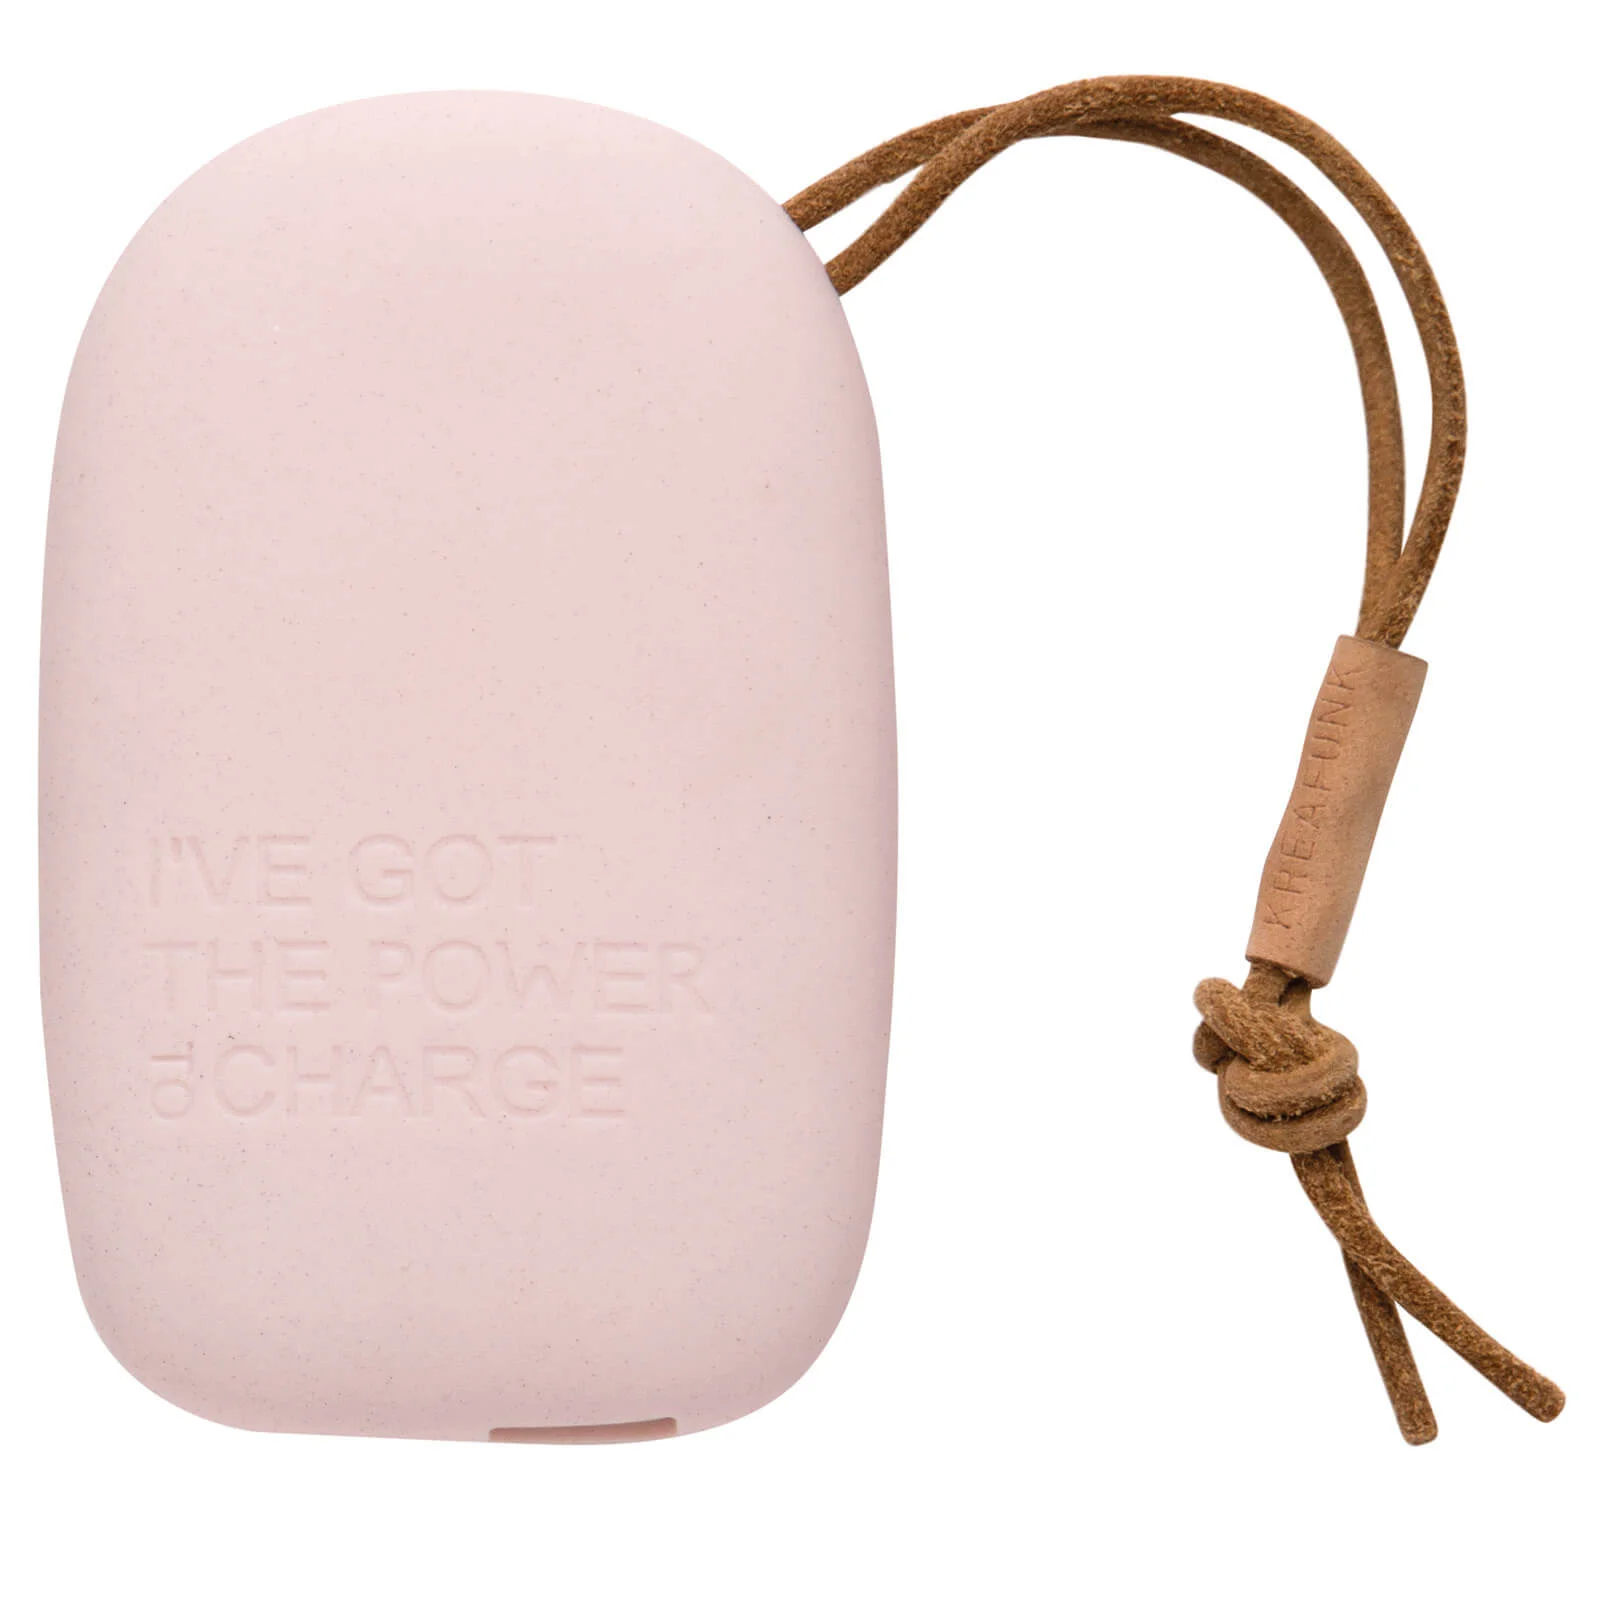 Kreafunk toCHARGE Power Bank - Dusty Pink Image 1